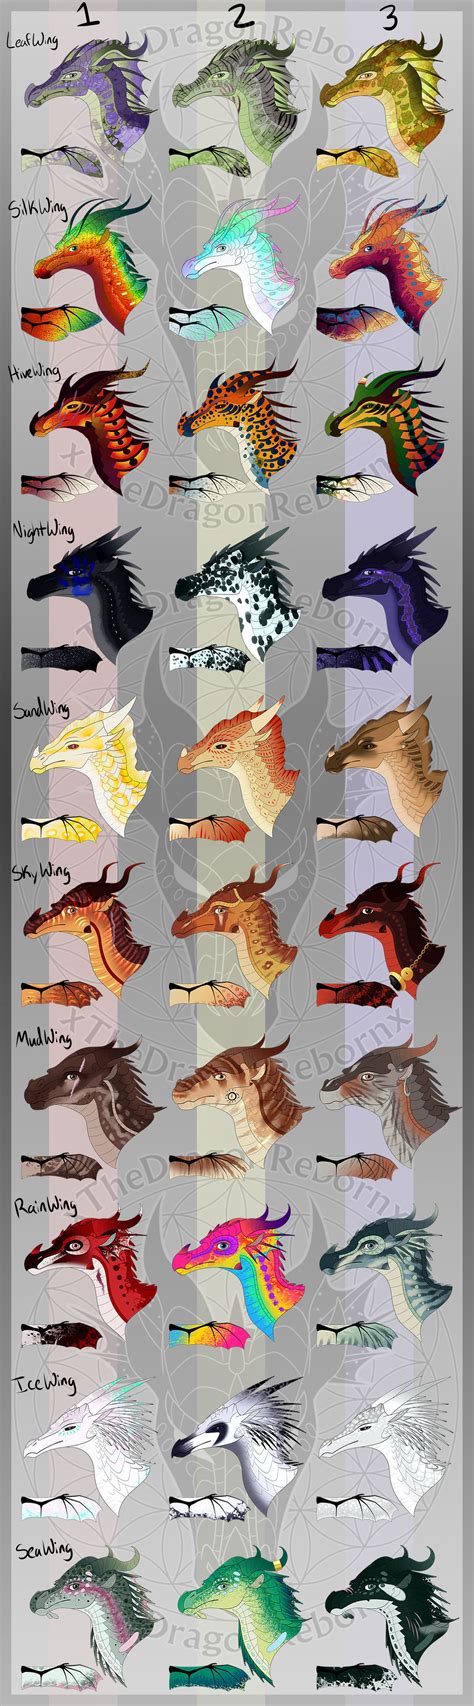 June 2018 Wof Single Tribe Adopts All Sold By Xthedragonrebornx On